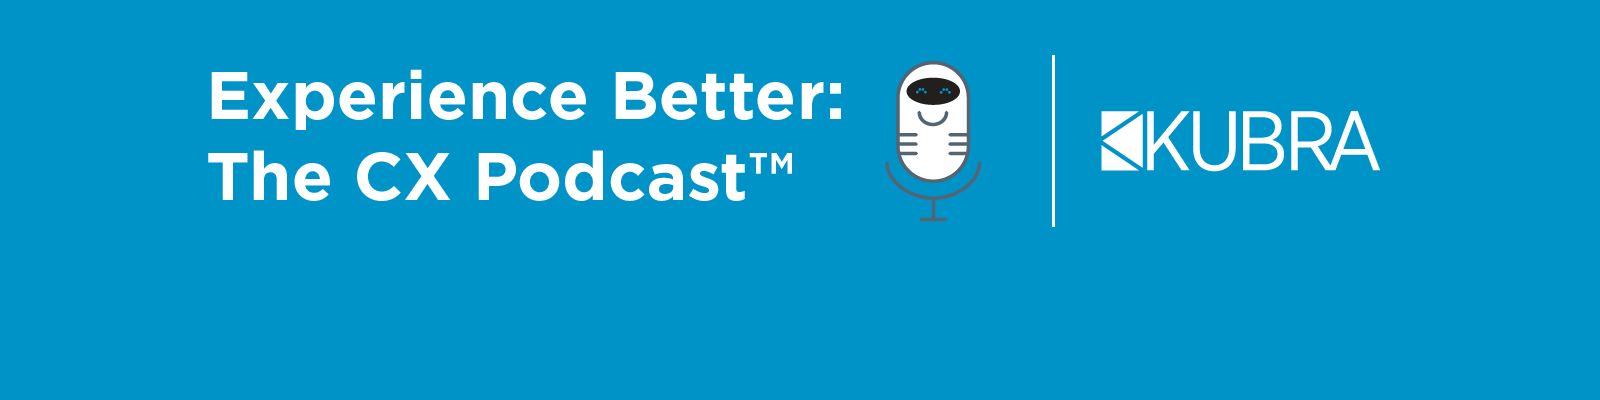 Experience Better: The CX Podcast